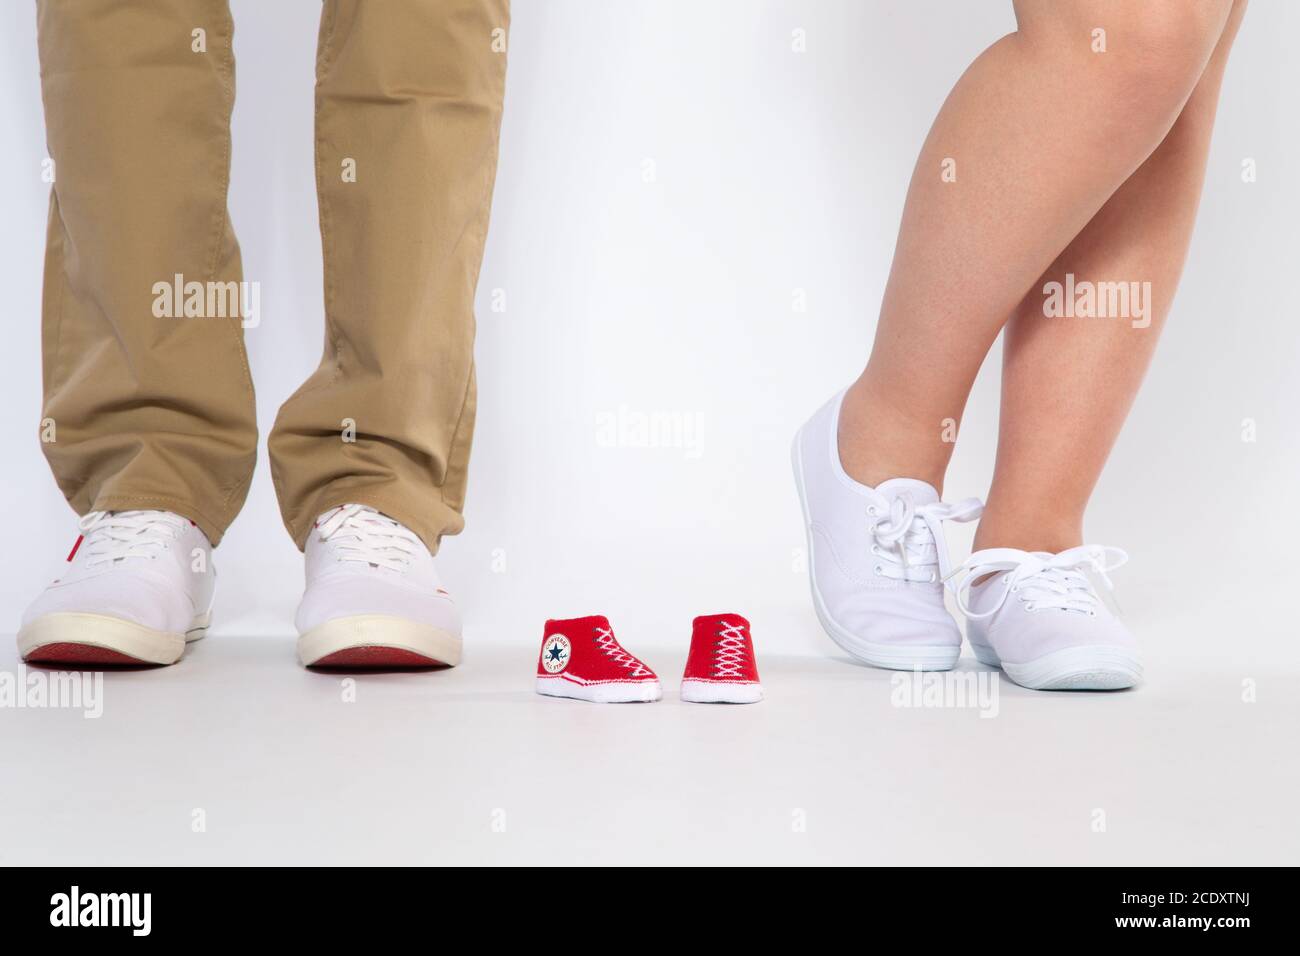 Two pairs of feet from the parents and shoes from an unborn baby Stock Photo